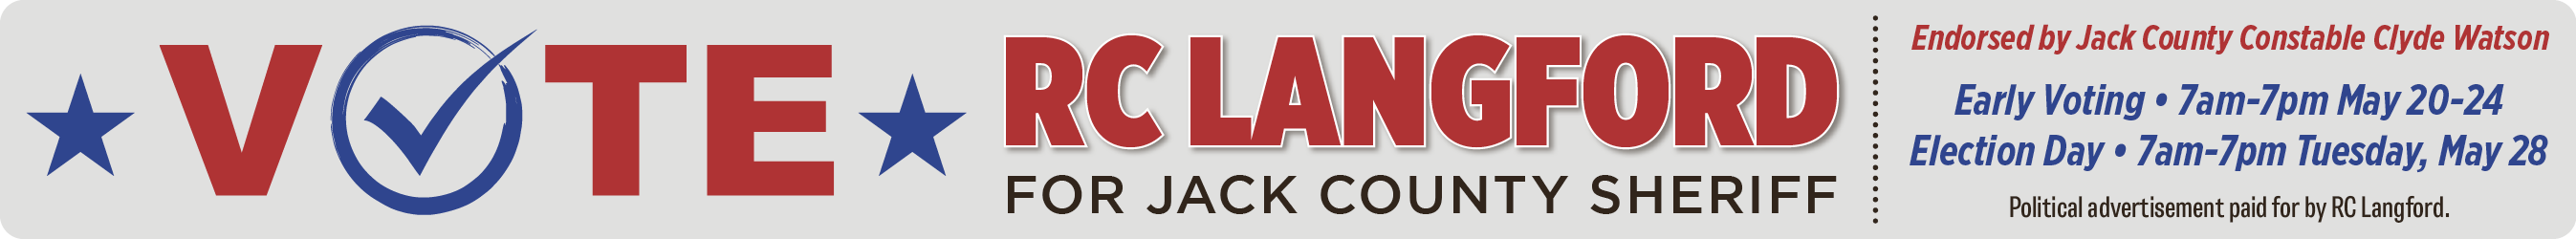 RC Langford for Jack County Sheriff Political Ad